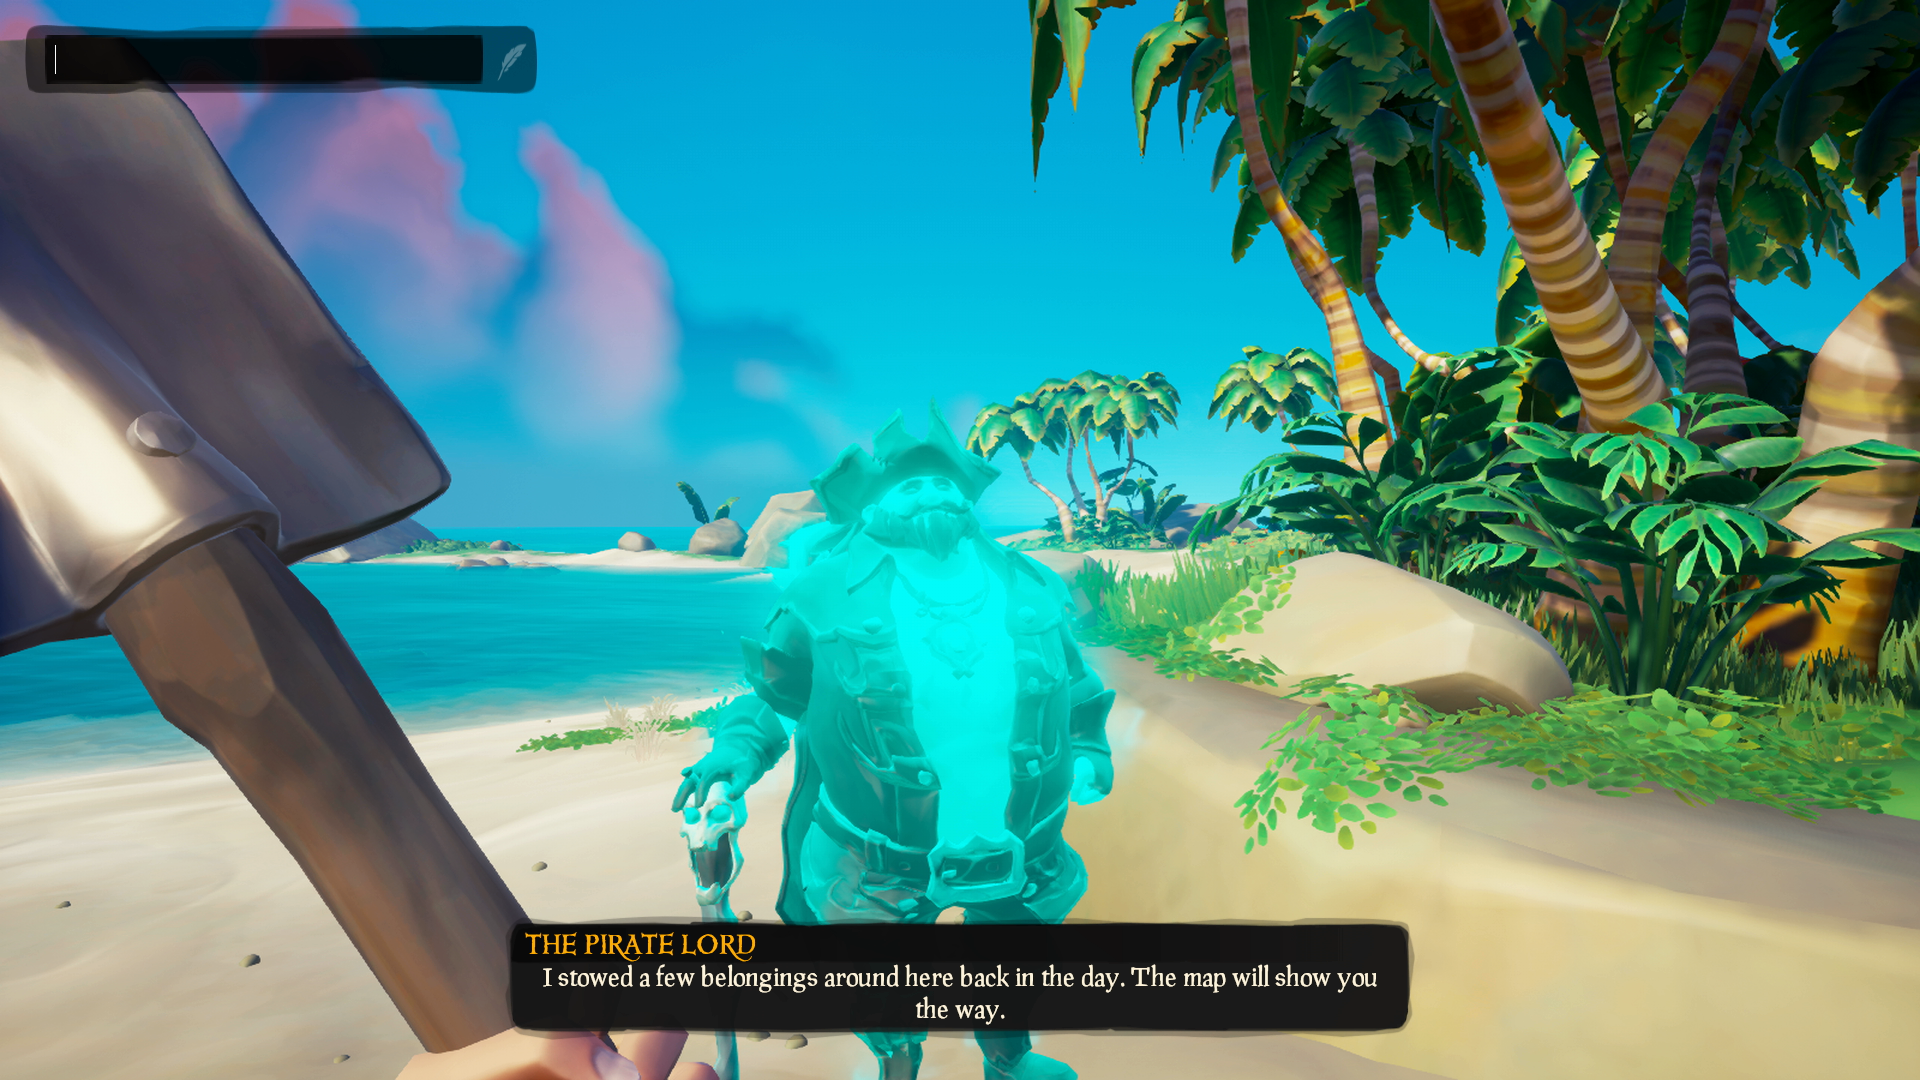 Screenshot of Sea of Thieves gameplay with a glowing pirate in the middle standing on the shoreline of a beach with text "The Pirate Lord" and "I stowed a few belongings around here back in the day.  The map will show you the way." 